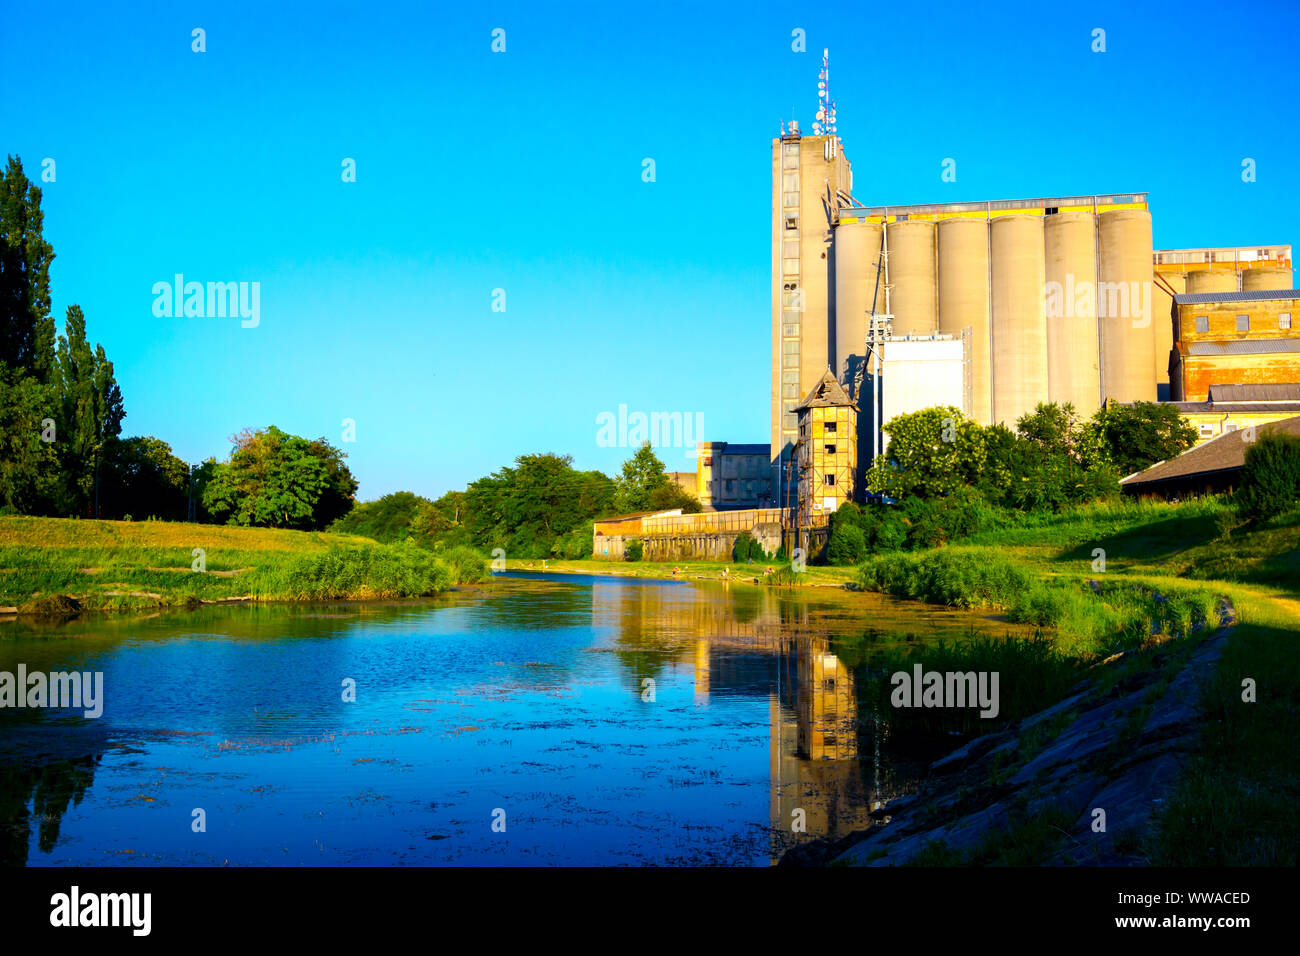 View on big and old concrete grain silos in urban landscape by the lake. Stock Photo